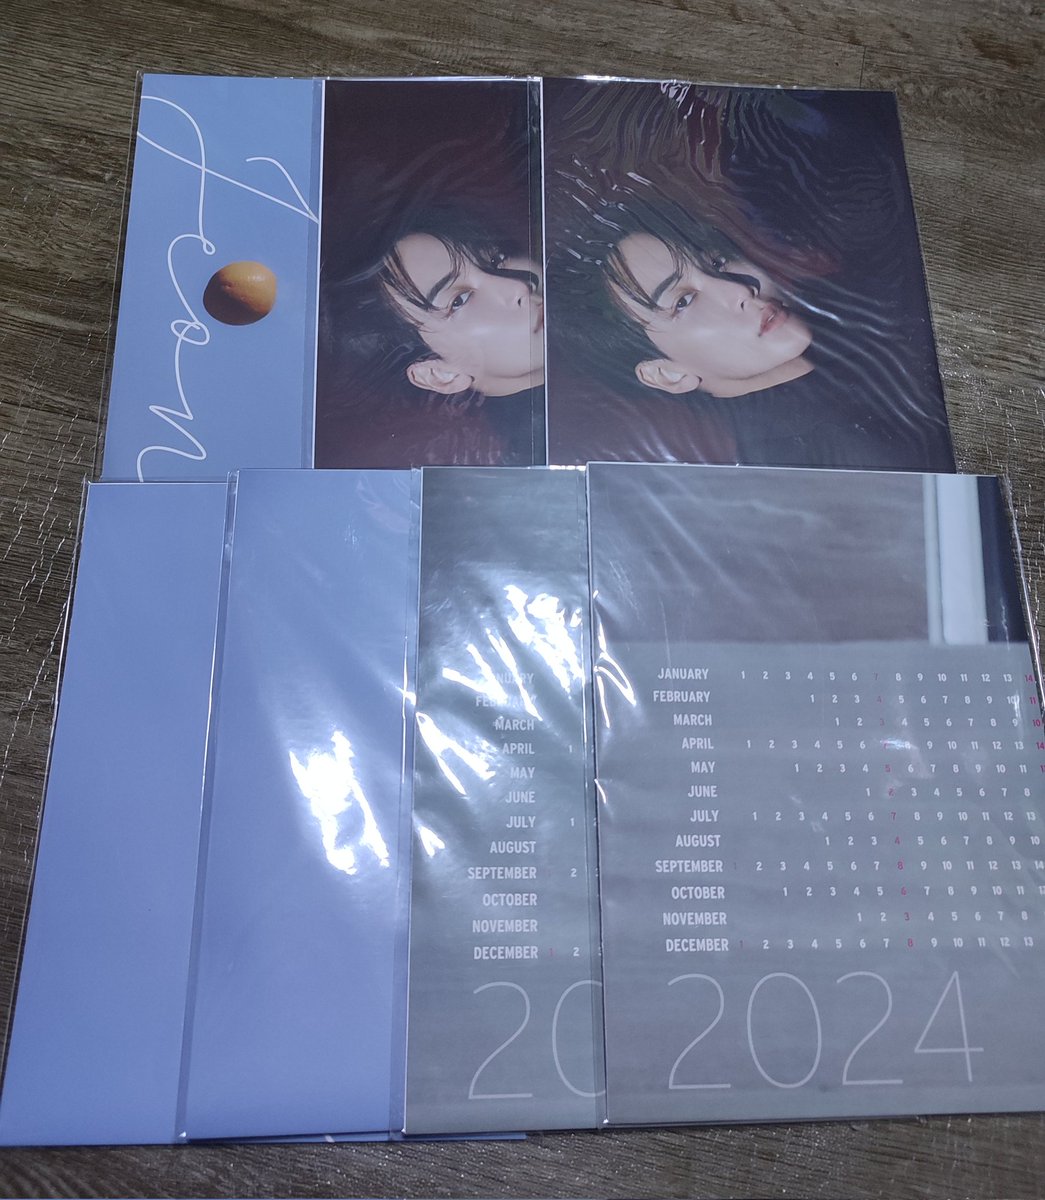 wts lfb ph svt

seventeen dicon issue n°17 jeonghan wonwoo calendar poster a & b version

— ₱170 each + fees
— onhand, ready to ship
— all sealed

dop: payo once oc is sent
mod: sco, direct jnt
loc: laguna

dm mine to claim